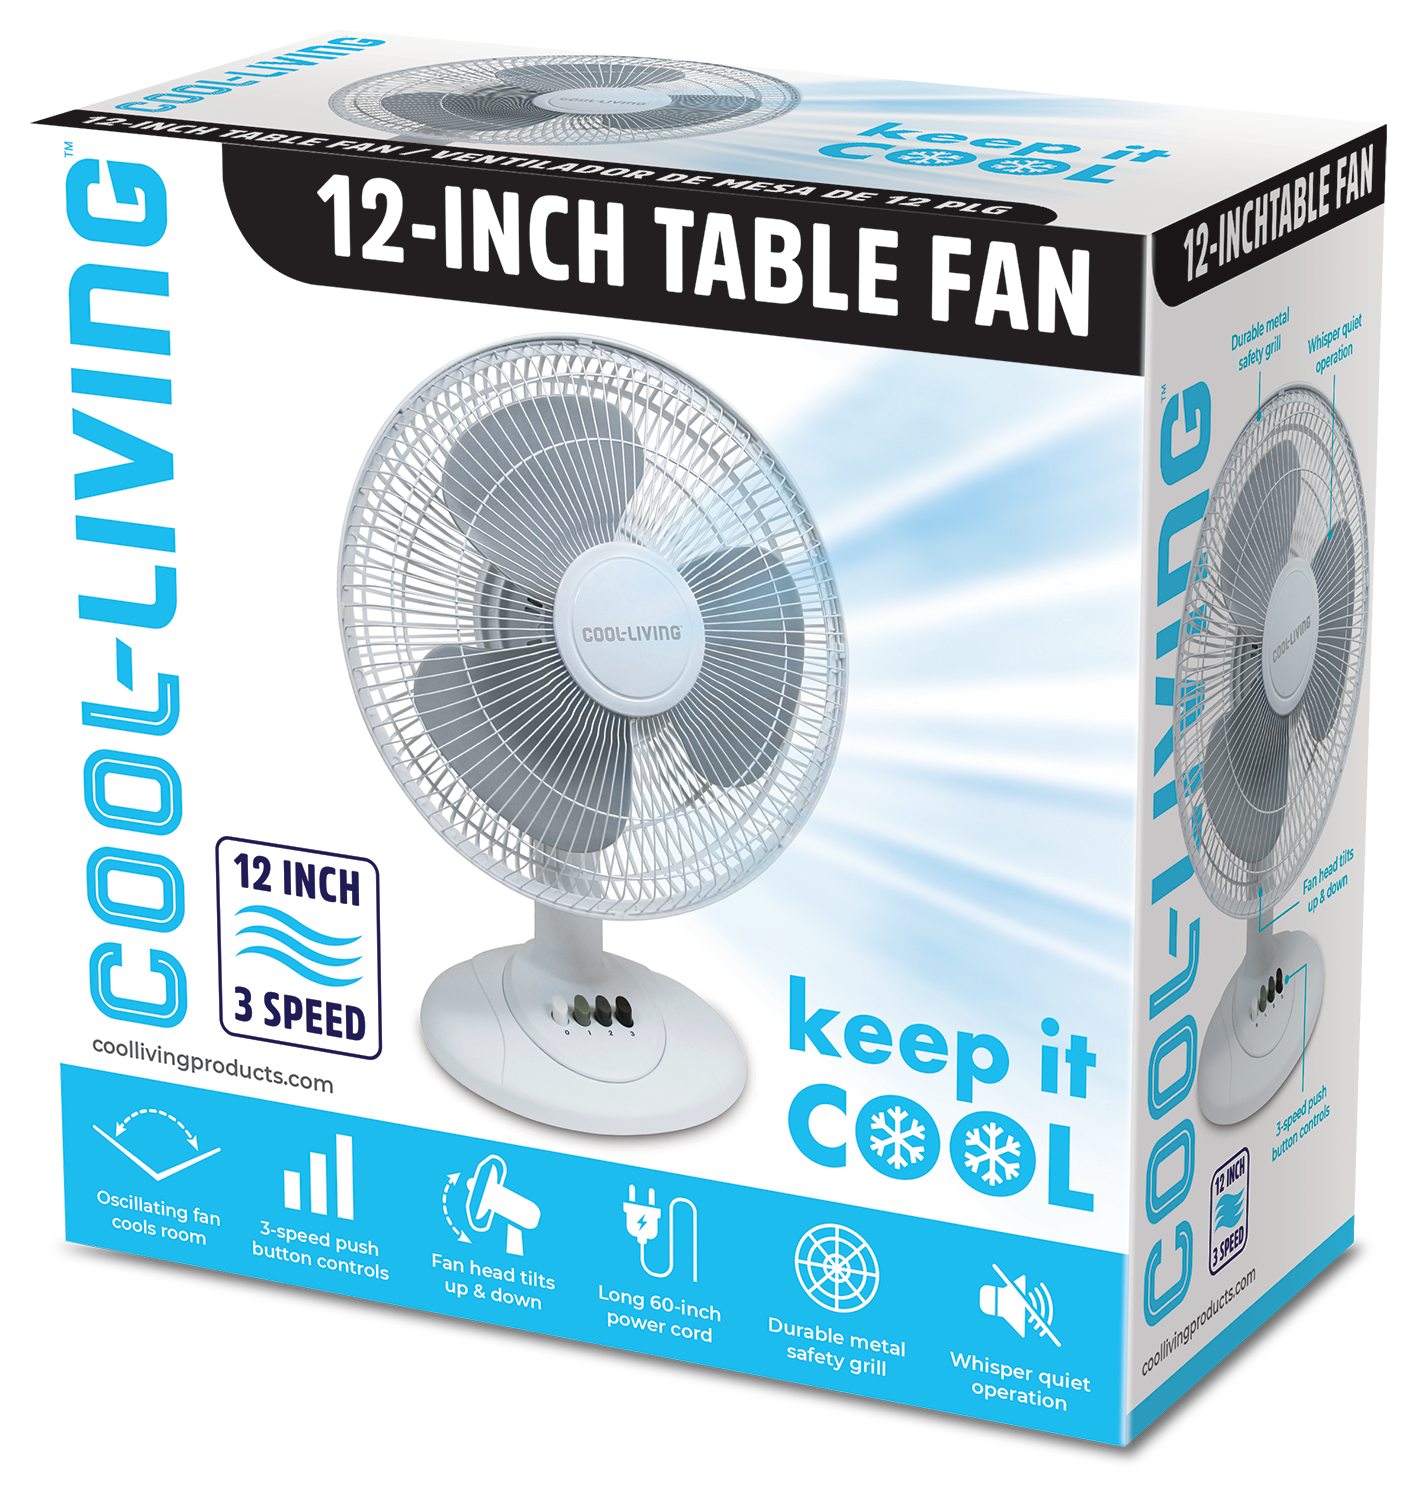 Cool Living 12" 3-Speed Oscillating Table Fan with Adjustable Tilt, Convenient Push Button Controls, Quiet Operation